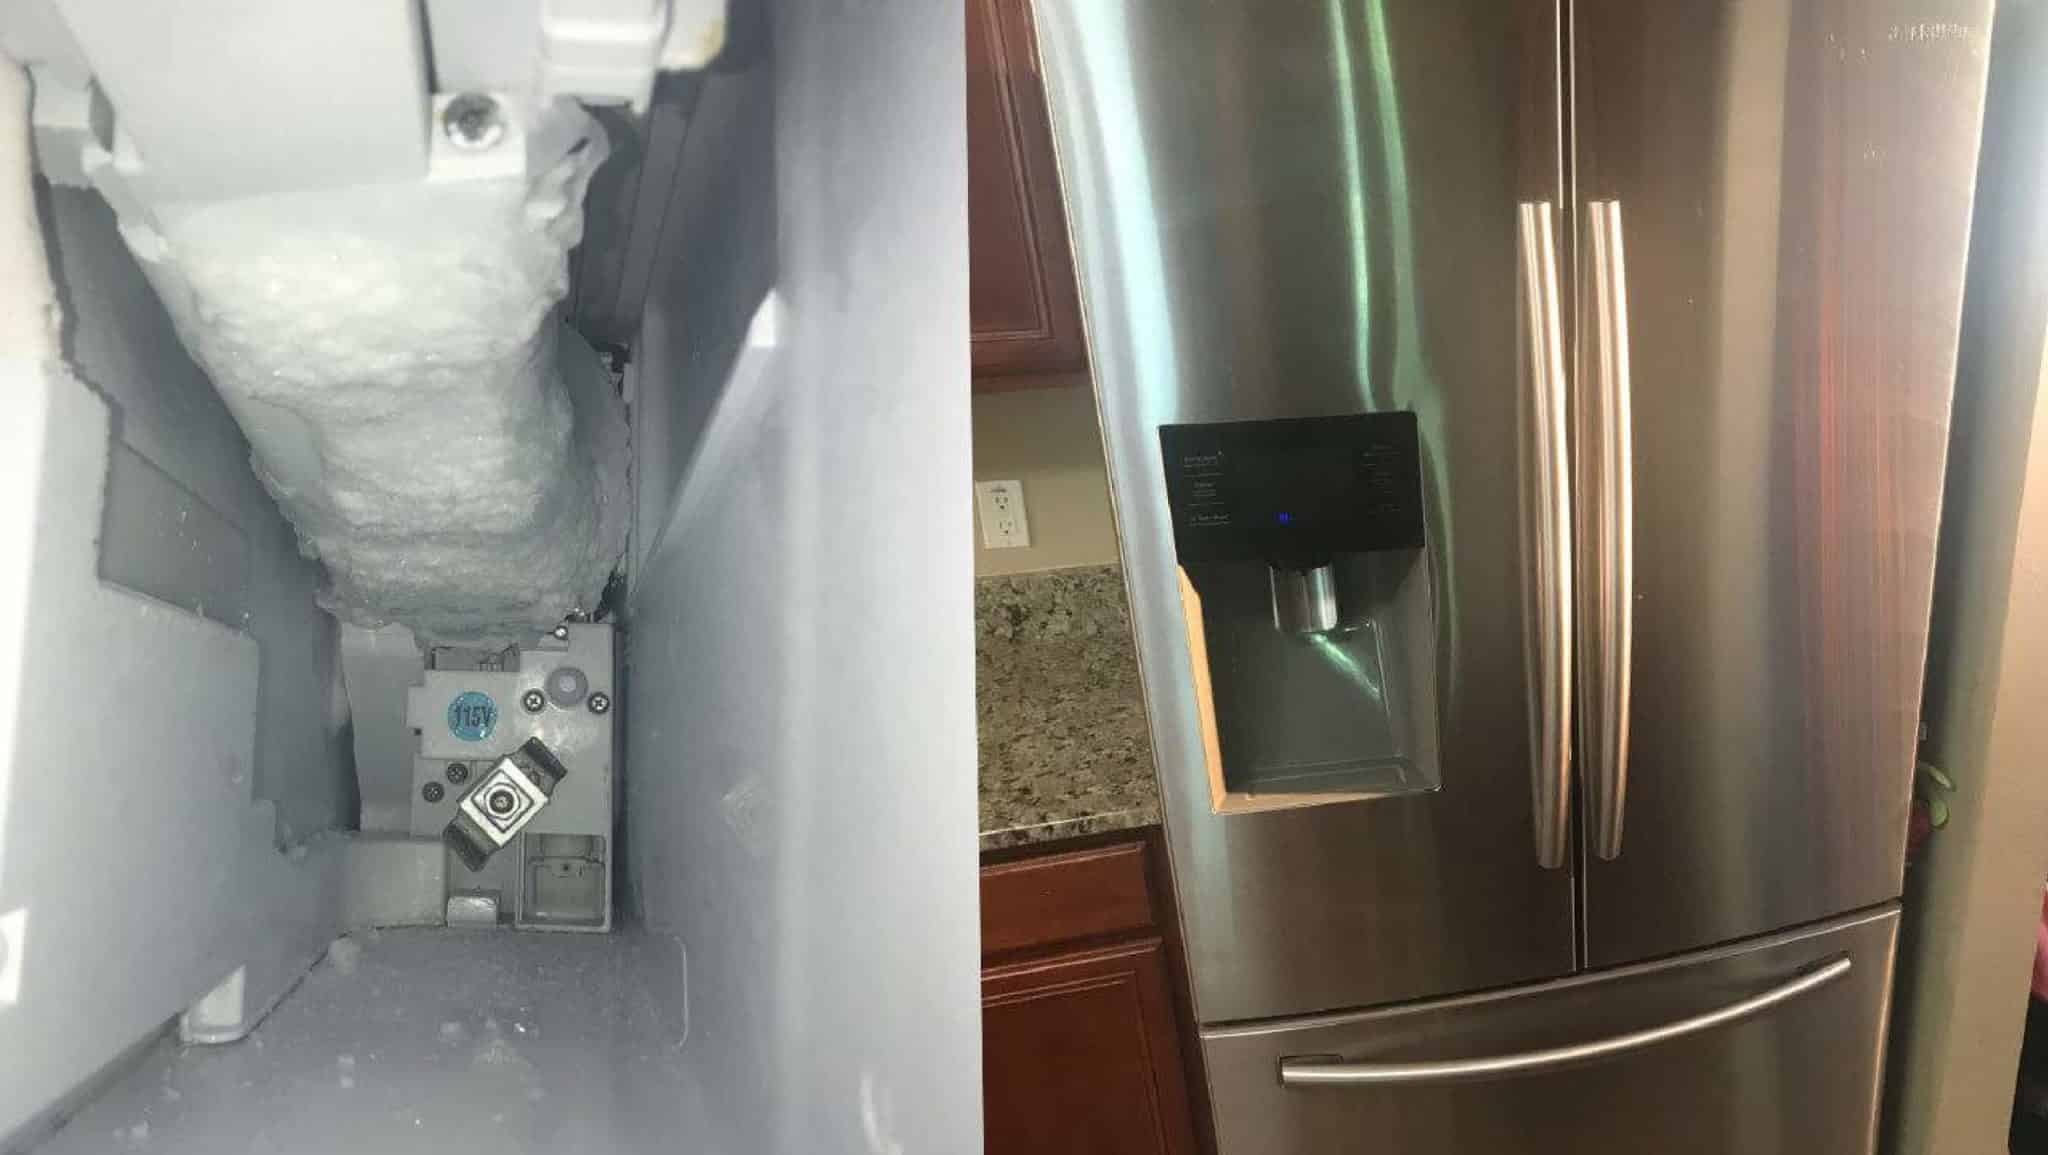 Samsung refrigerator owners frustrated with ice makers freezing over